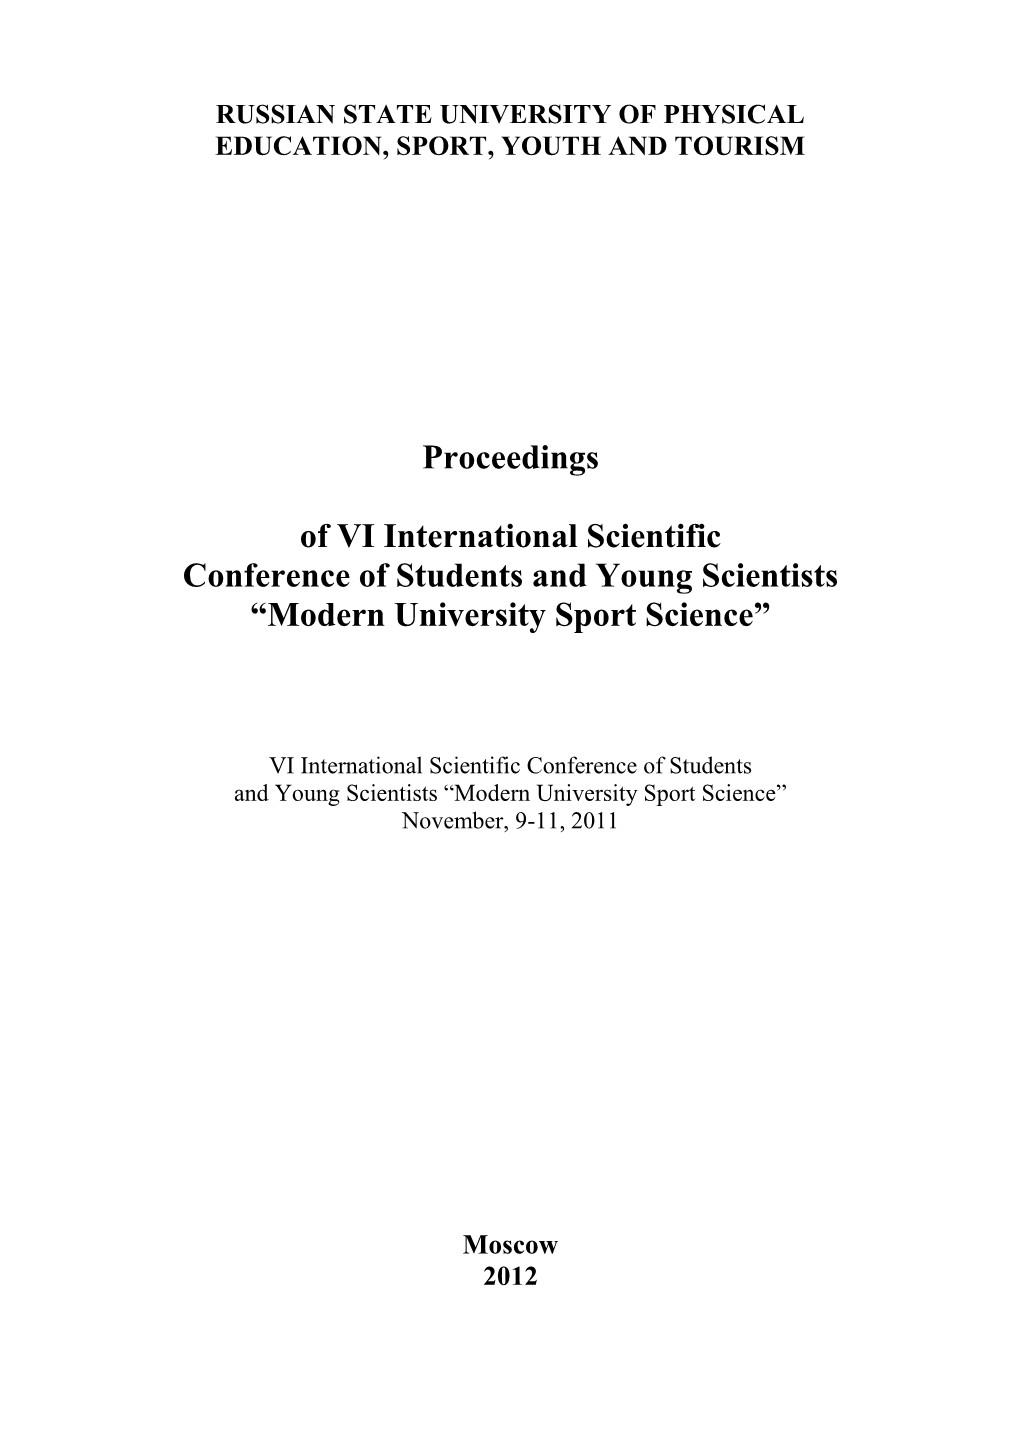 Proceedings of VI International Scientific Conference of Students